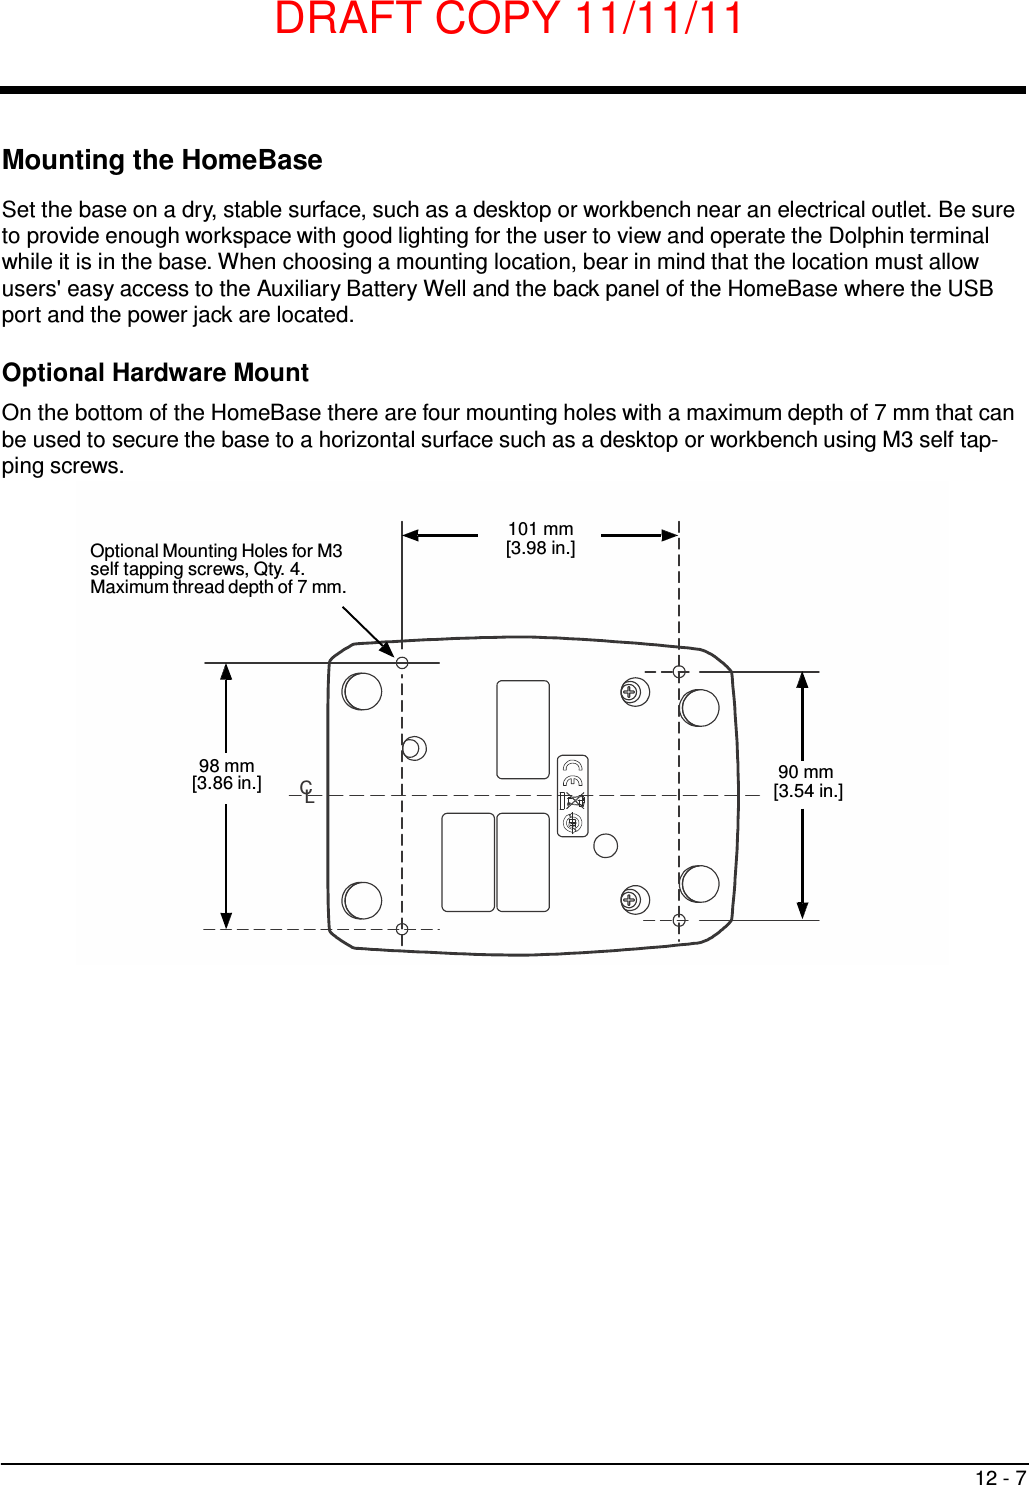 DRAFT COPY 11/11/11 12 - 7     Mounting the HomeBase  Set the base on a dry, stable surface, such as a desktop or workbench near an electrical outlet. Be sure to provide enough workspace with good lighting for the user to view and operate the Dolphin terminal while it is in the base. When choosing a mounting location, bear in mind that the location must allow users&apos; easy access to the Auxiliary Battery Well and the back panel of the HomeBase where the USB port and the power jack are located.  Optional Hardware Mount  On the bottom of the HomeBase there are four mounting holes with a maximum depth of 7 mm that can be used to secure the base to a horizontal surface such as a desktop or workbench using M3 self tap- ping screws.    Optional Mounting Holes for M3 self tapping screws, Qty. 4. Maximum thread depth of 7 mm. 101 mm [3.98 in.]         98 mm [3.86 in.]  CL 90 mm [3.54 in.] 